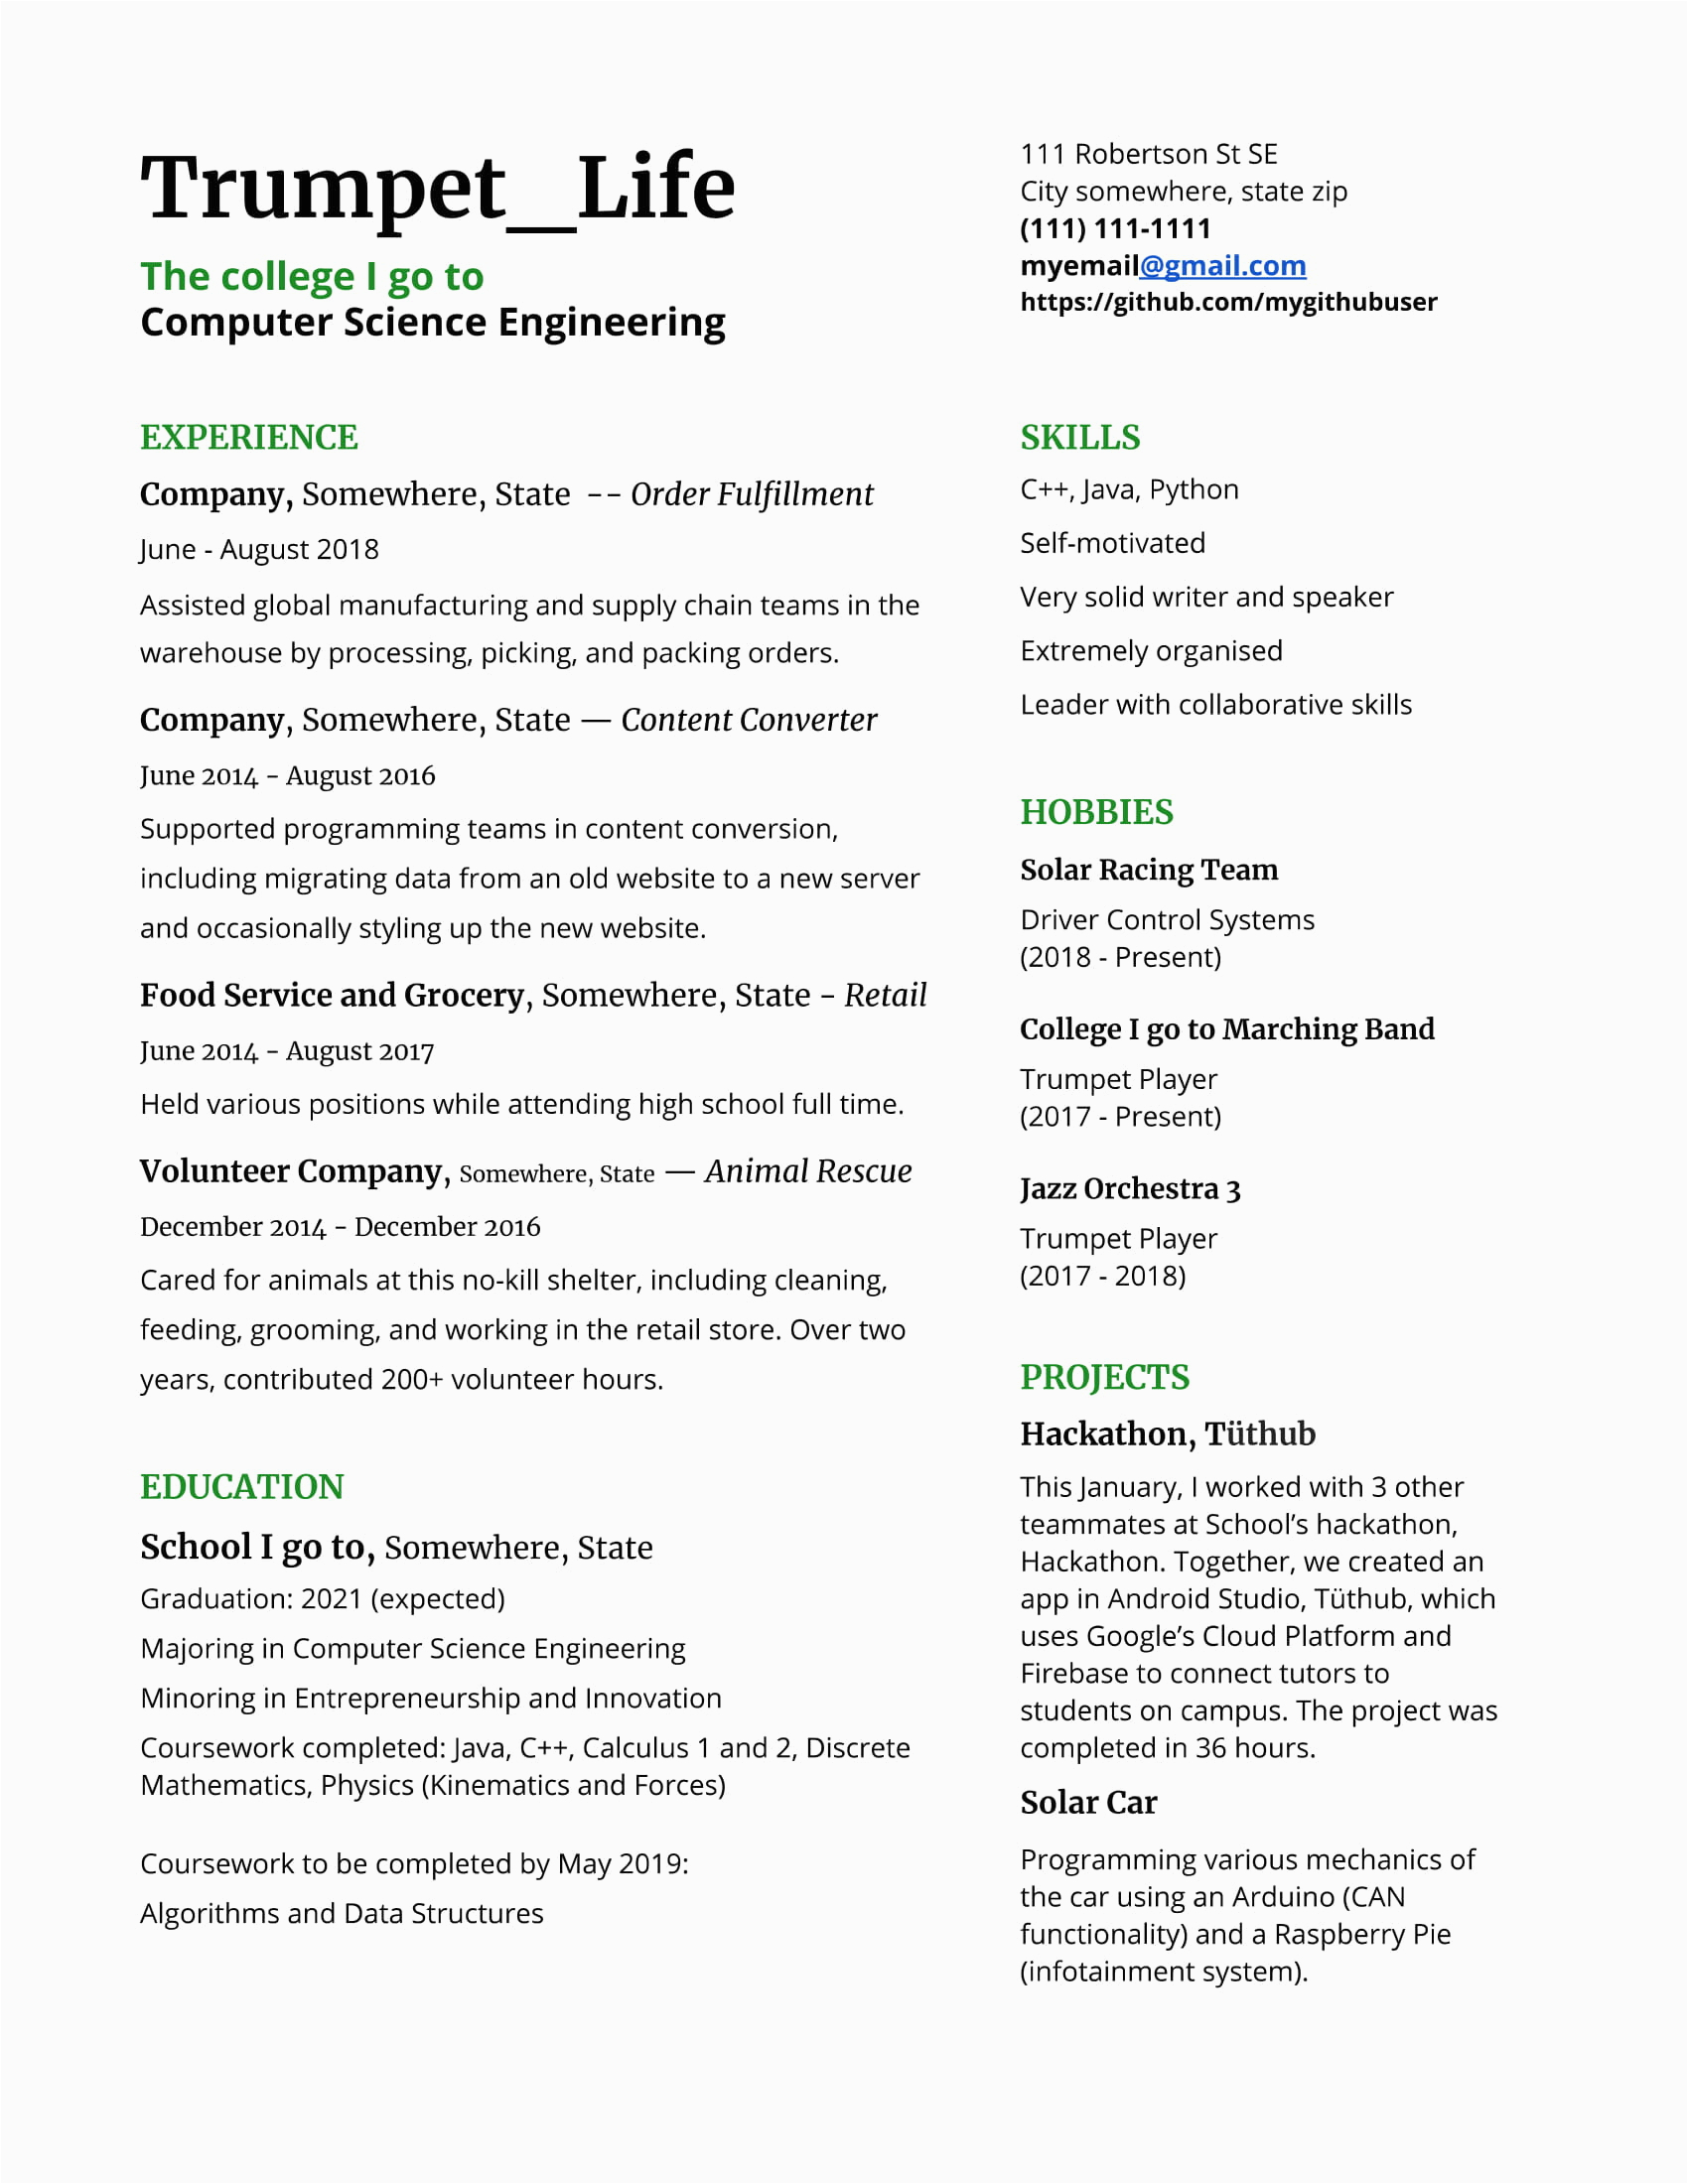 Sample Resume for sophomores In College sophomore In College Resume for Internships and A Career Fair Next